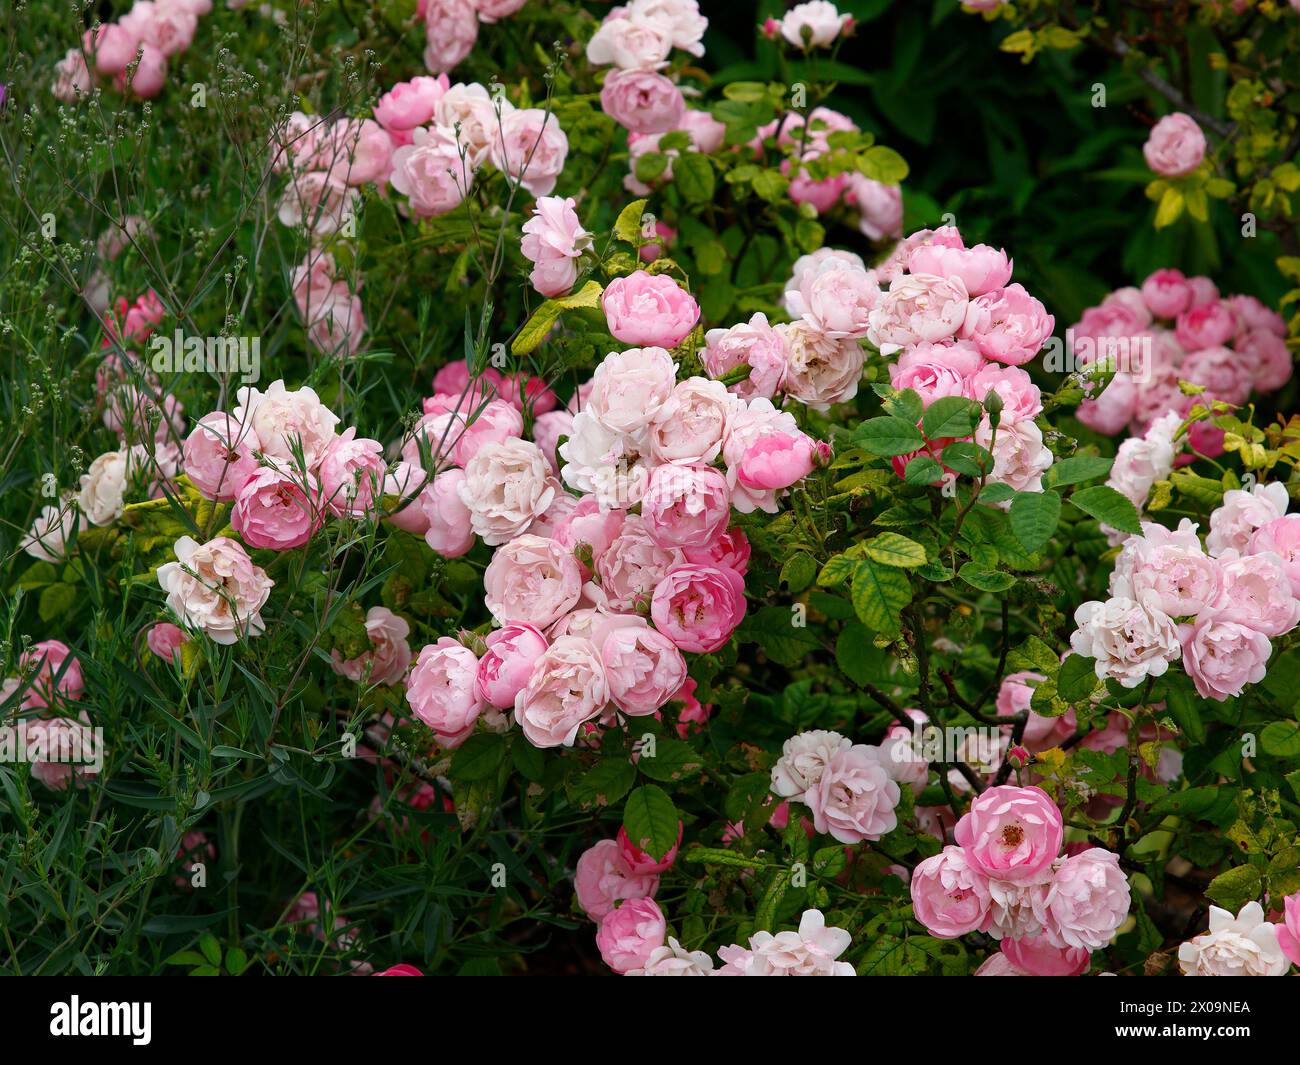 Closeup of the pink flowers of the garden shrub rose plant Rosa raubritter macrantha. Stock Photo